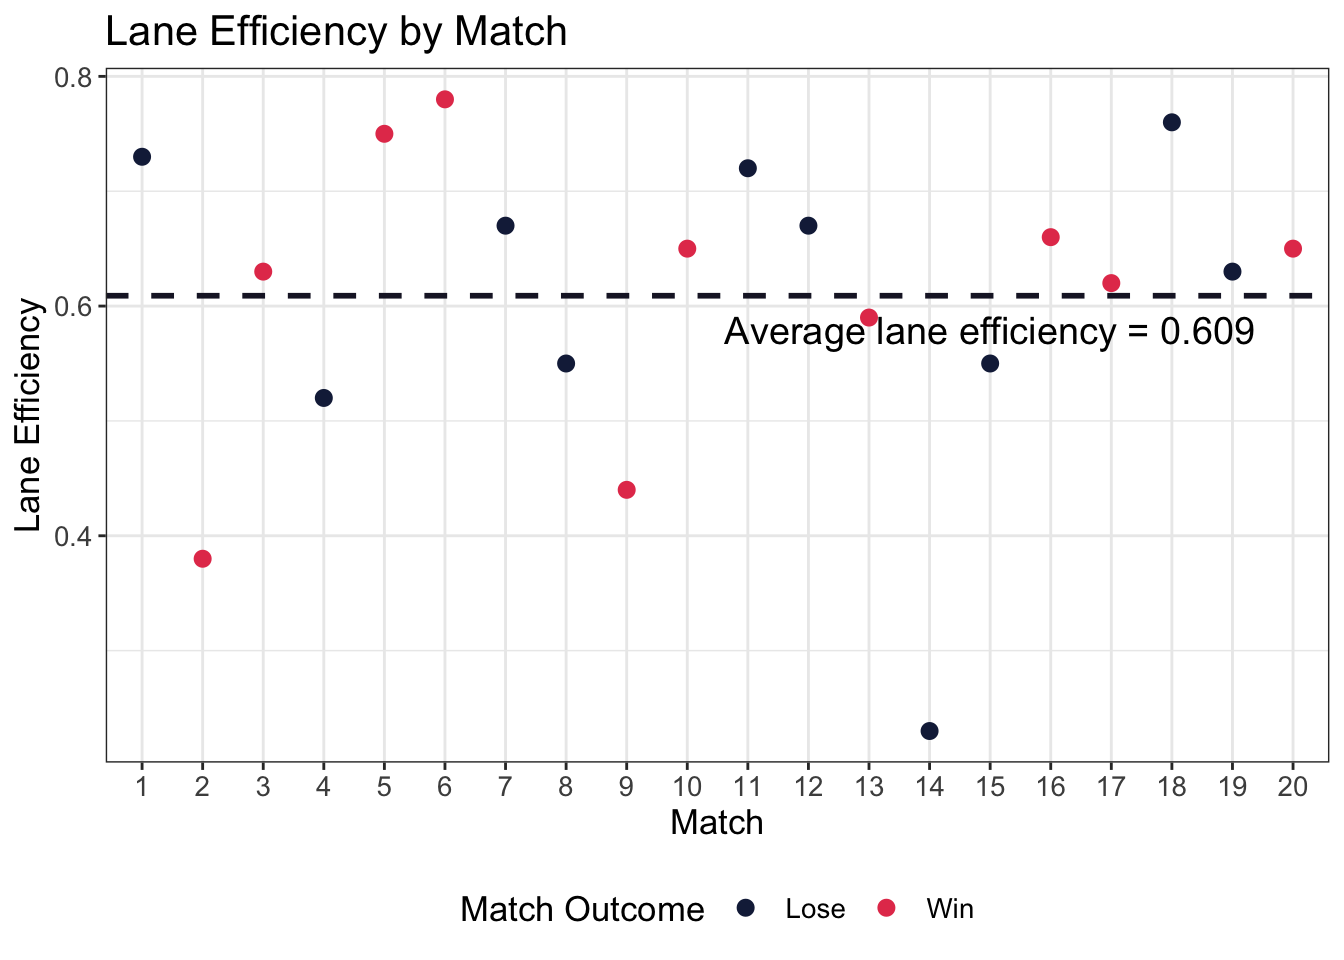 This figure shows my lane efficiency of my 20 most recent matchs. Each dot represents the lane efficiency of a match. Red dot represents a win. Black dots represents a loss. The dotted line marks the average lane efficiency.